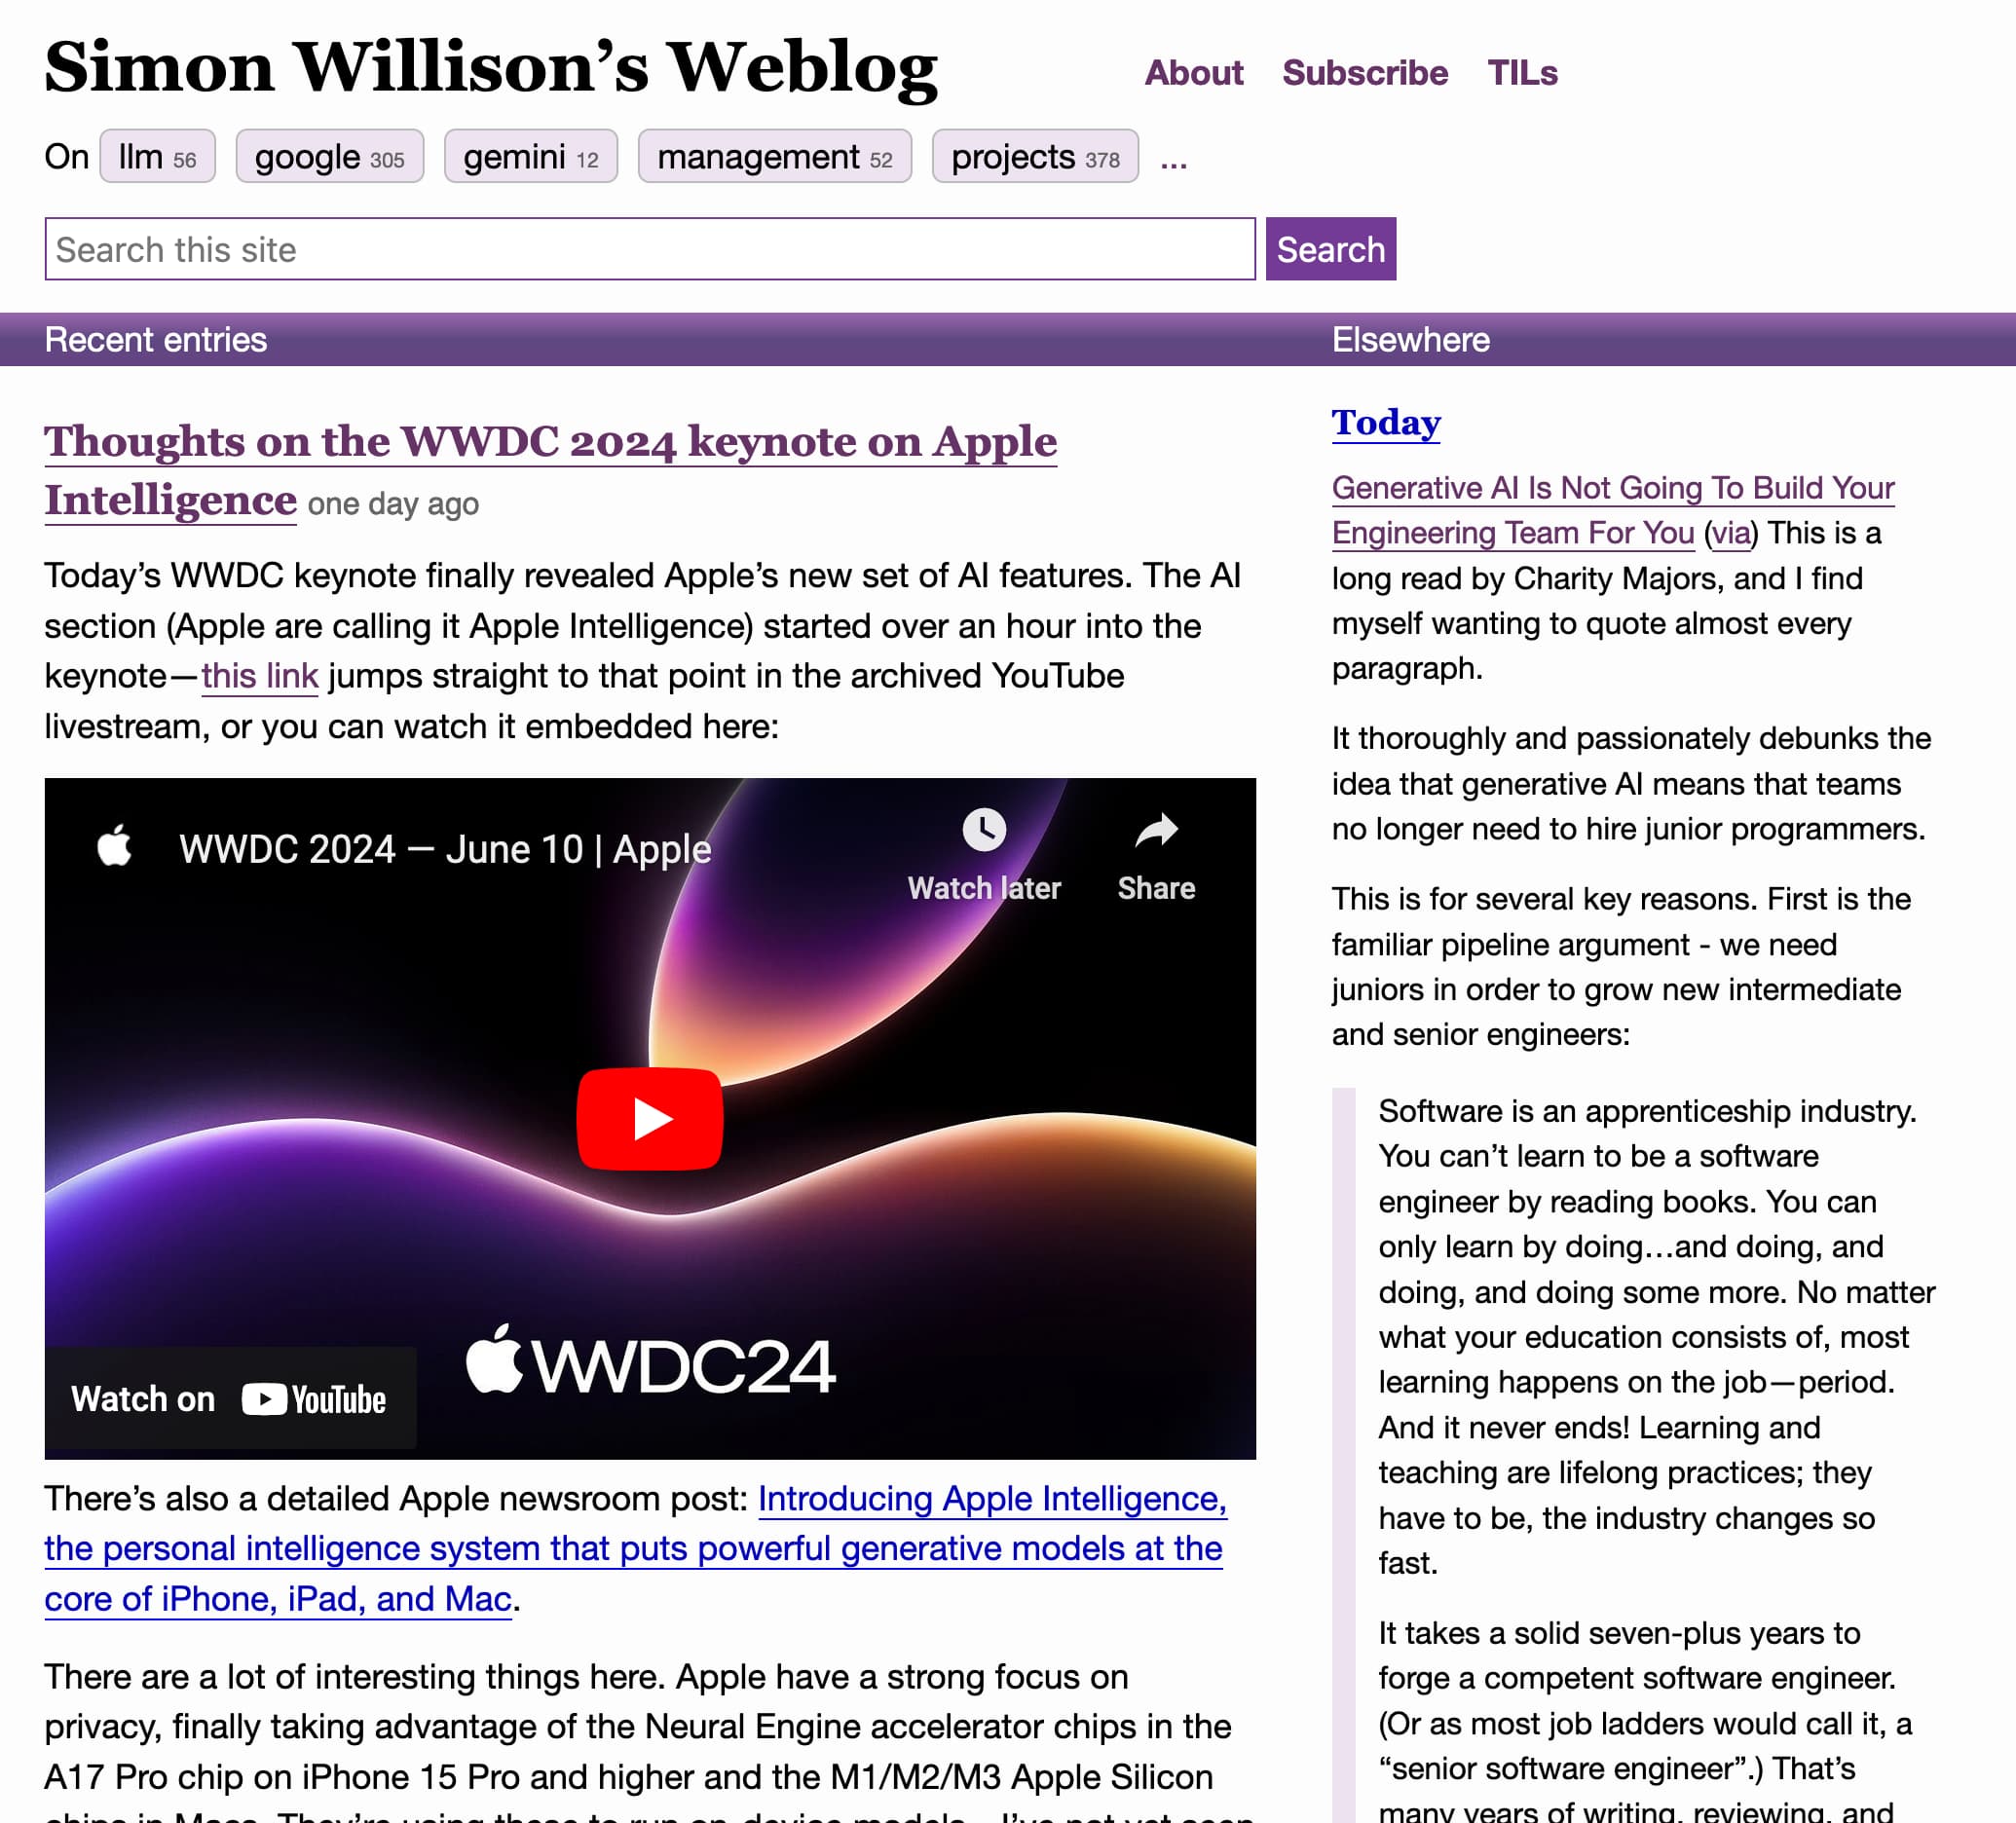 Screenshot of my blog with a big entry about Thoughts on the WWDC 2024 keynote on the left and a sidebar with a long blogmark description in the sidebar on the right